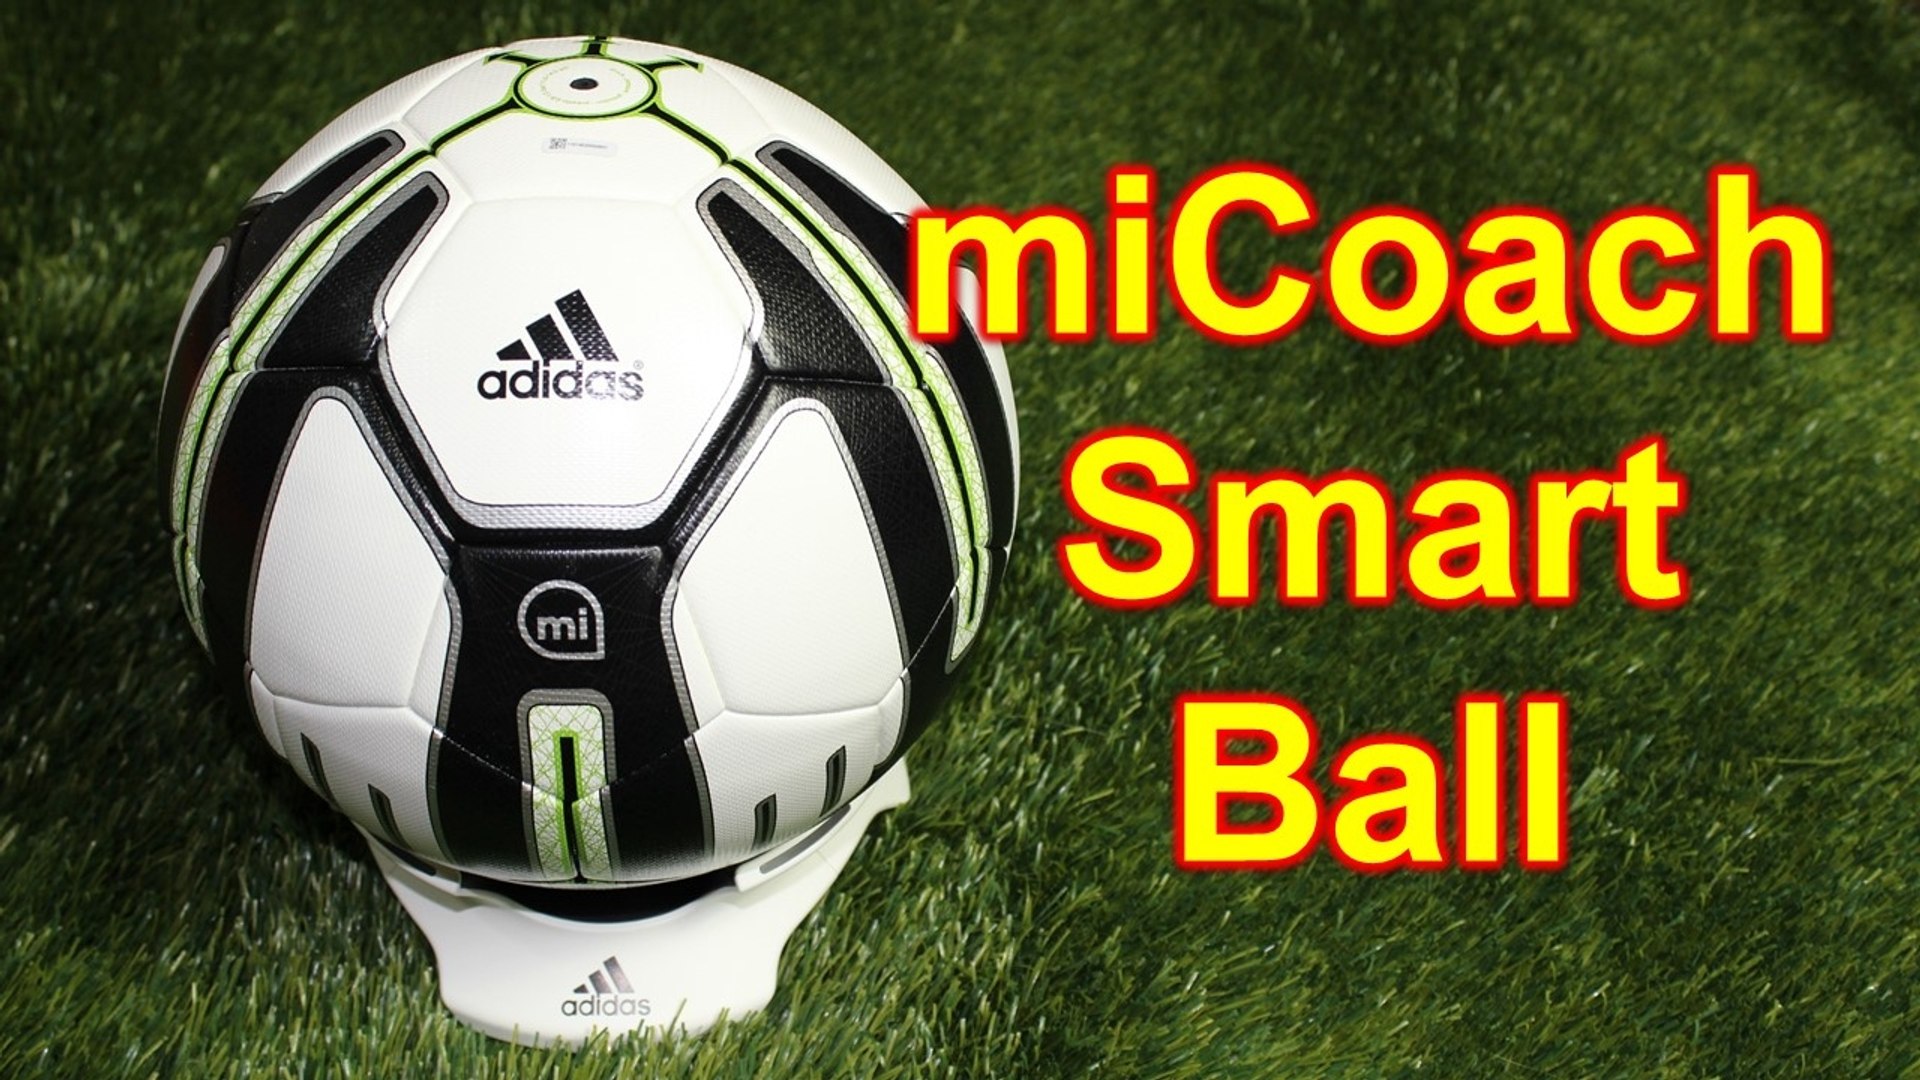 Adidas miCoach Smart Ball Unboxing & Overview - video Dailymotion